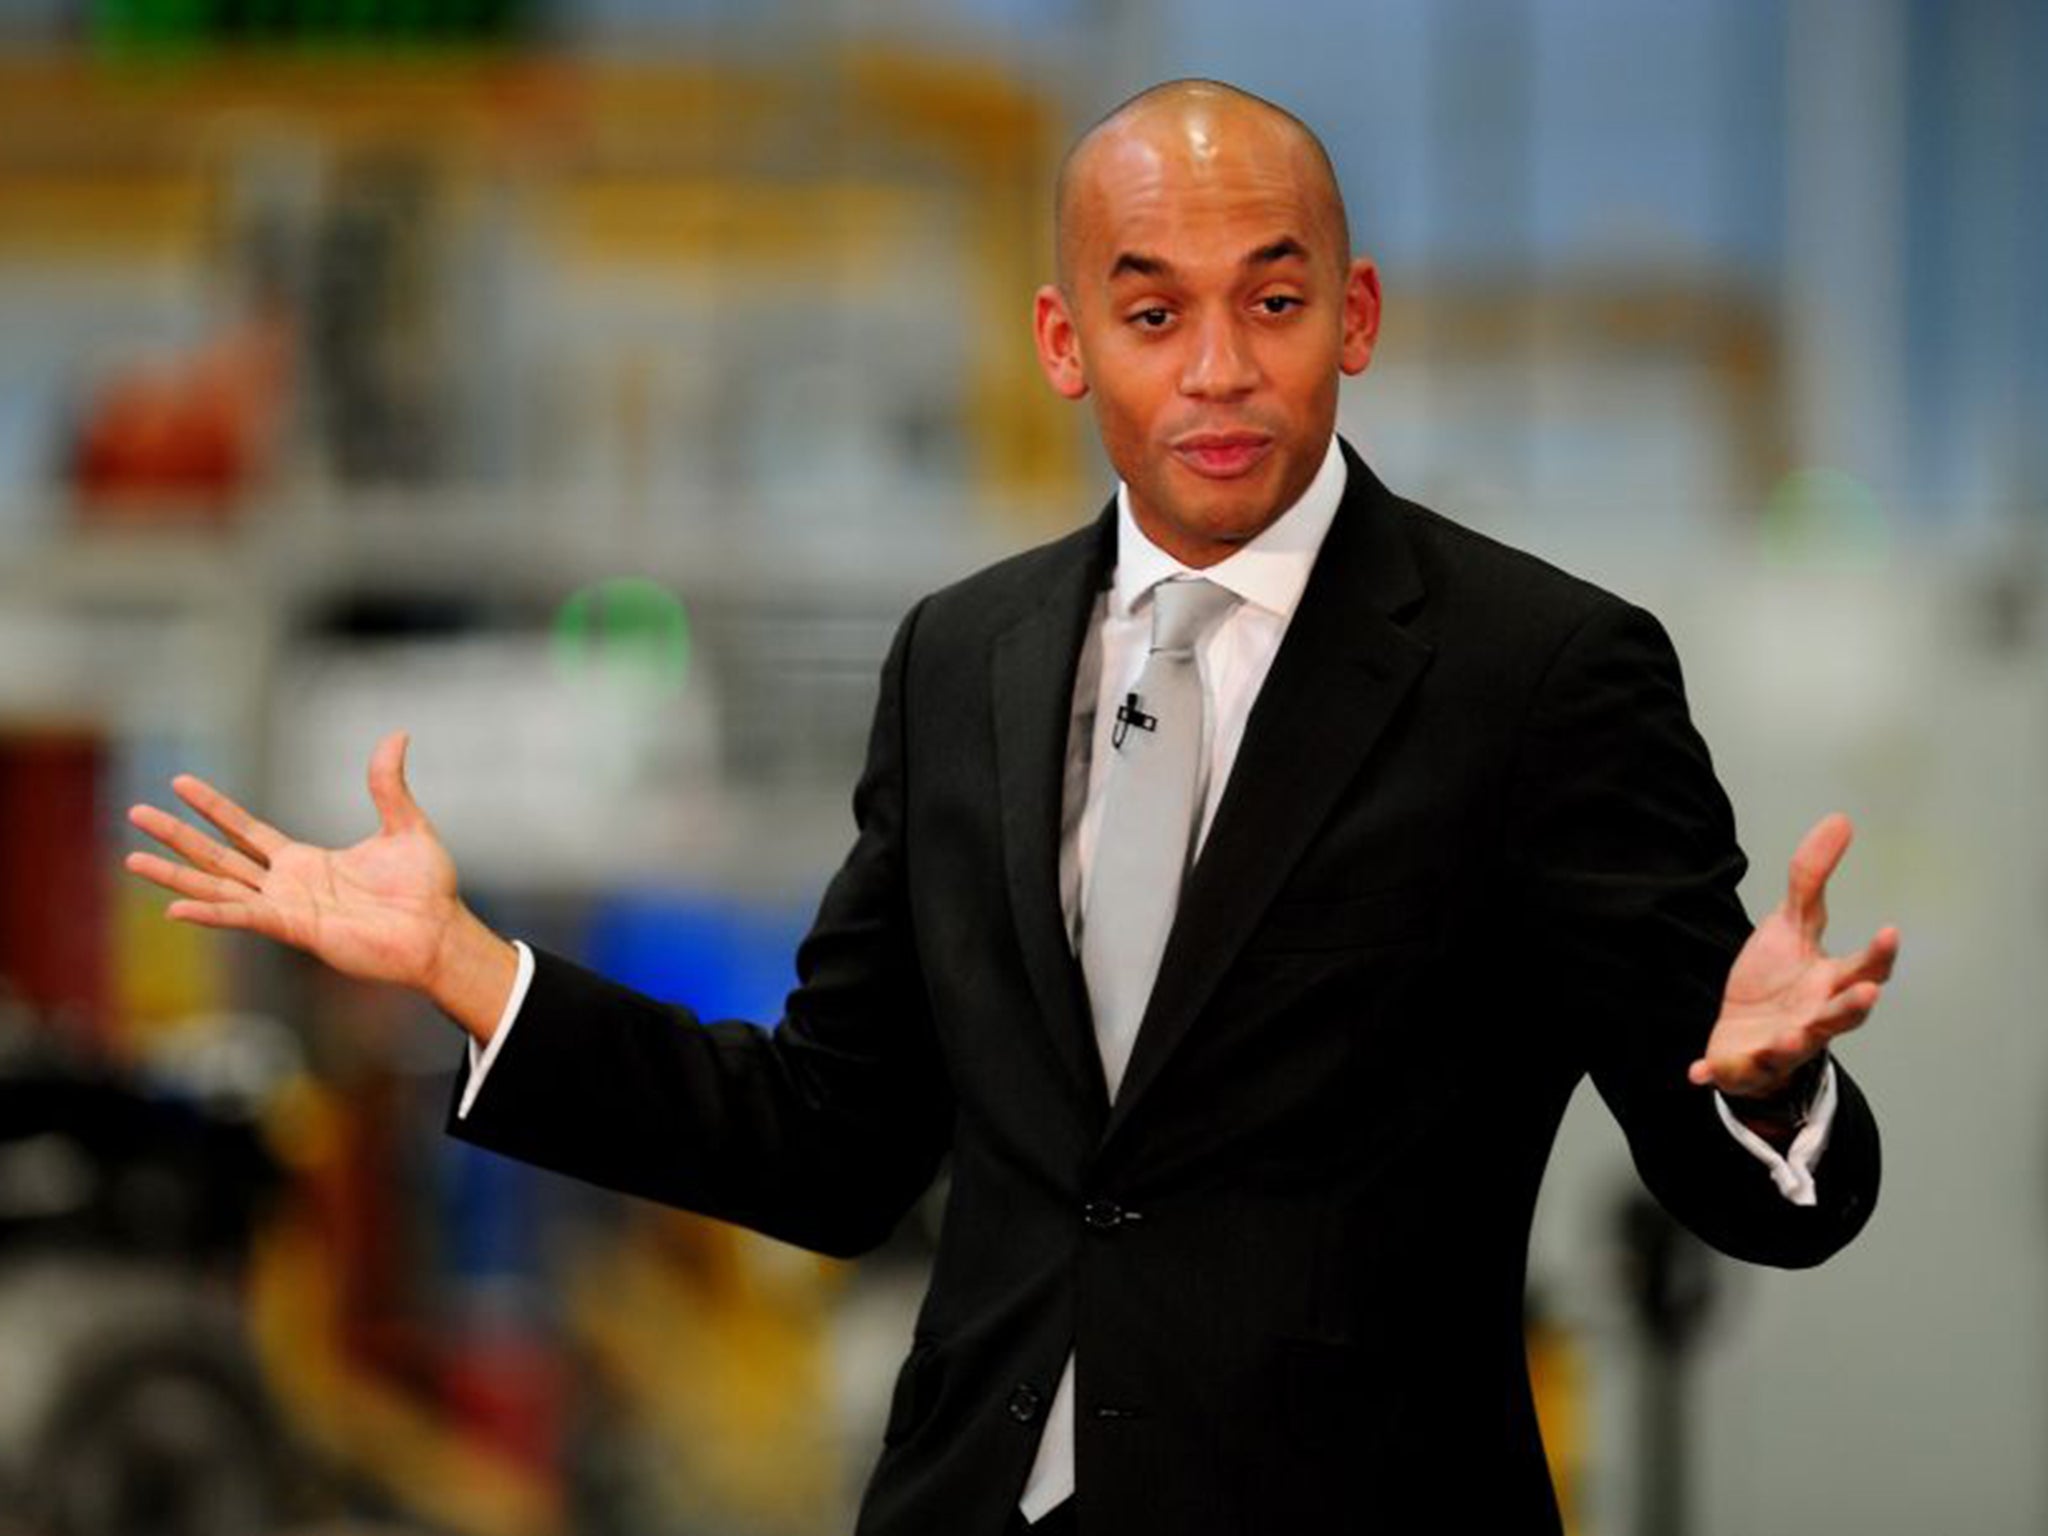 Chuka Umunna says only Labour’s policies, not its leadership, should be fair game for criticism